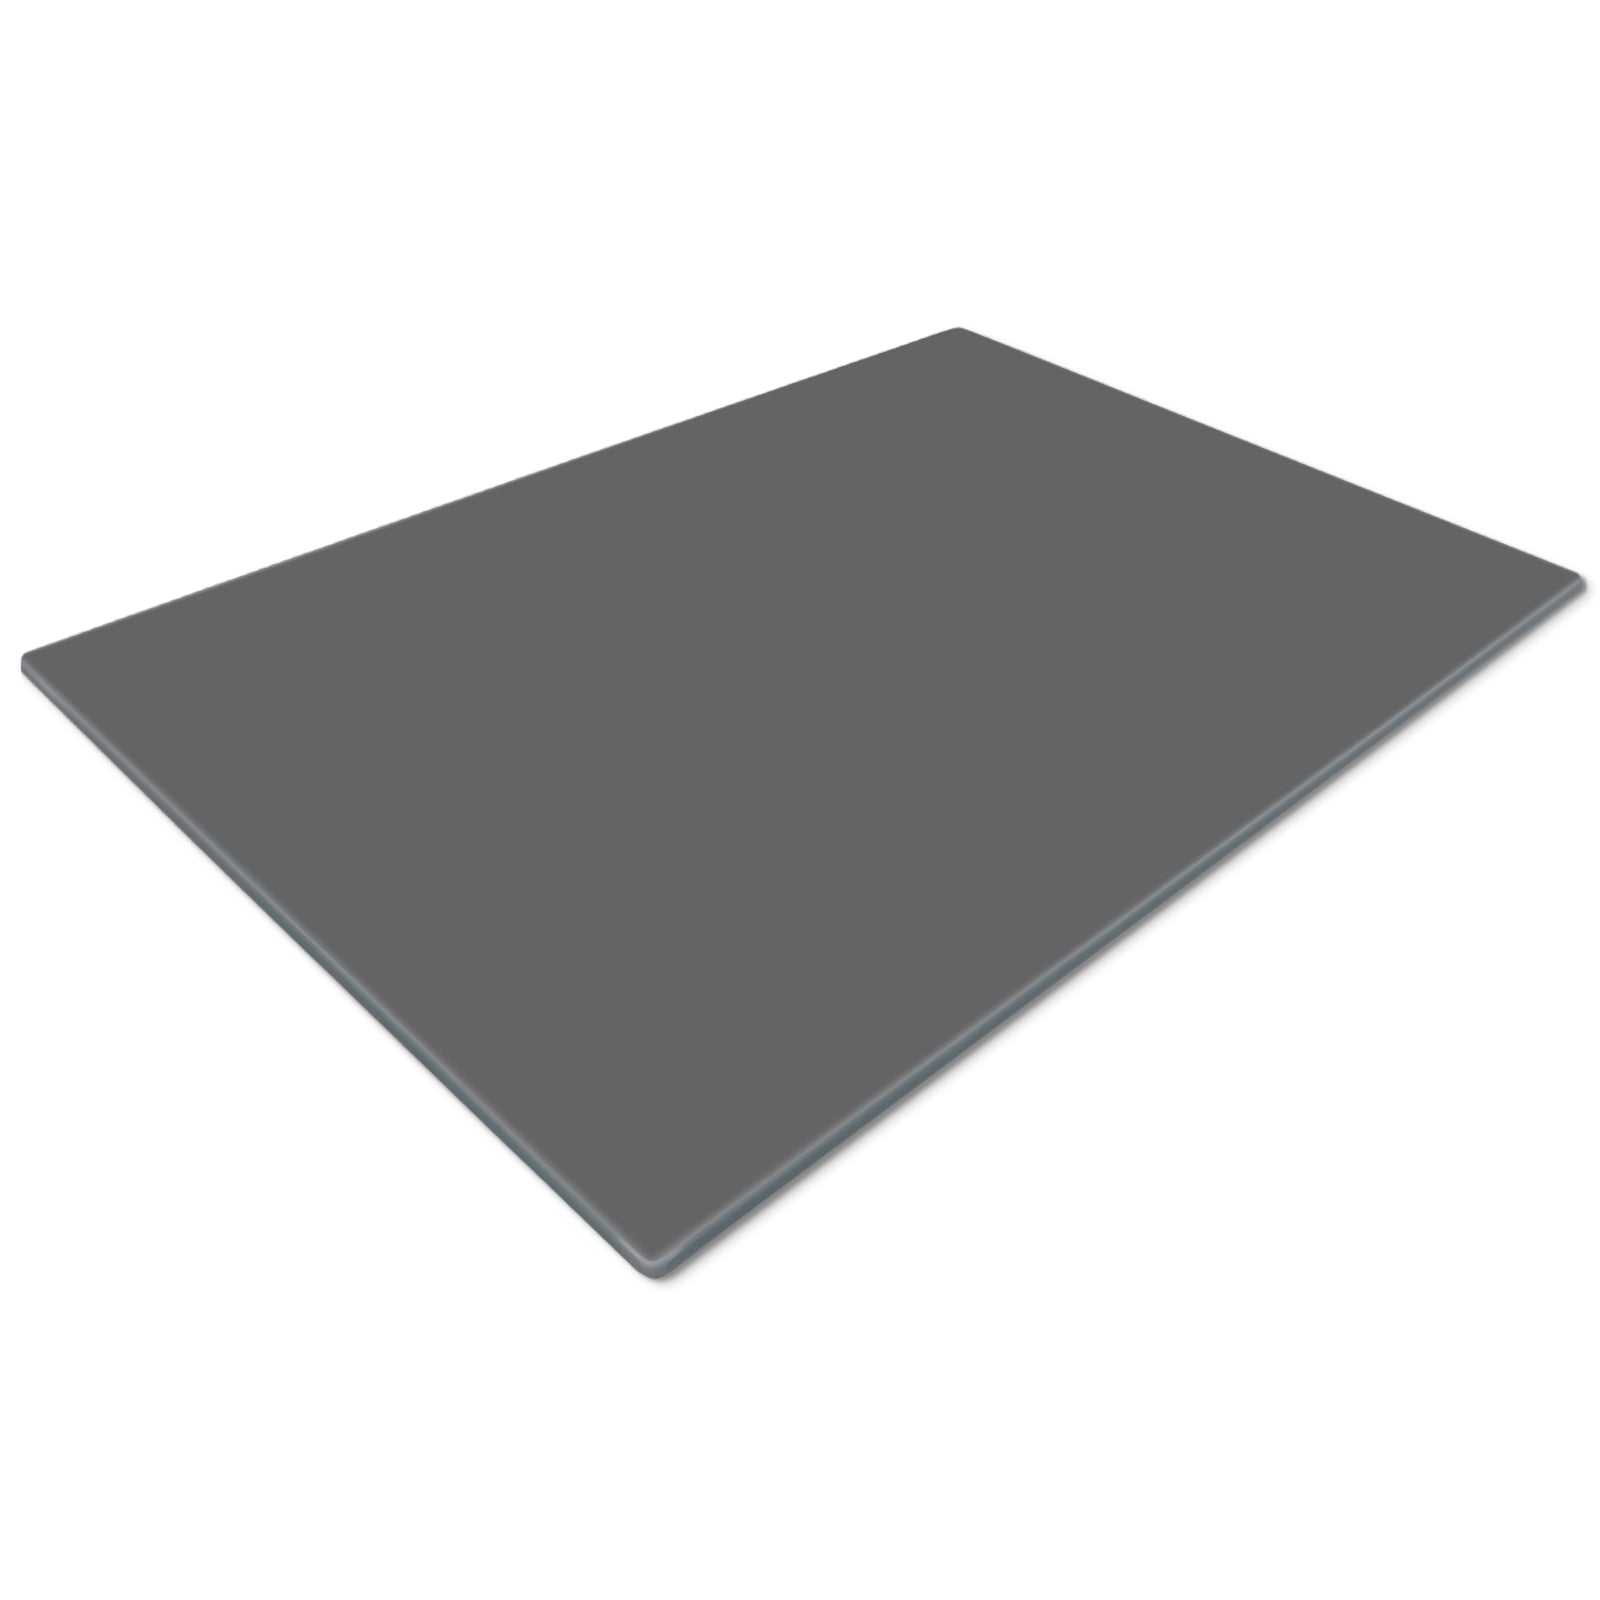 Glass Chopping Board For Kitchen in Grey Surface Protector